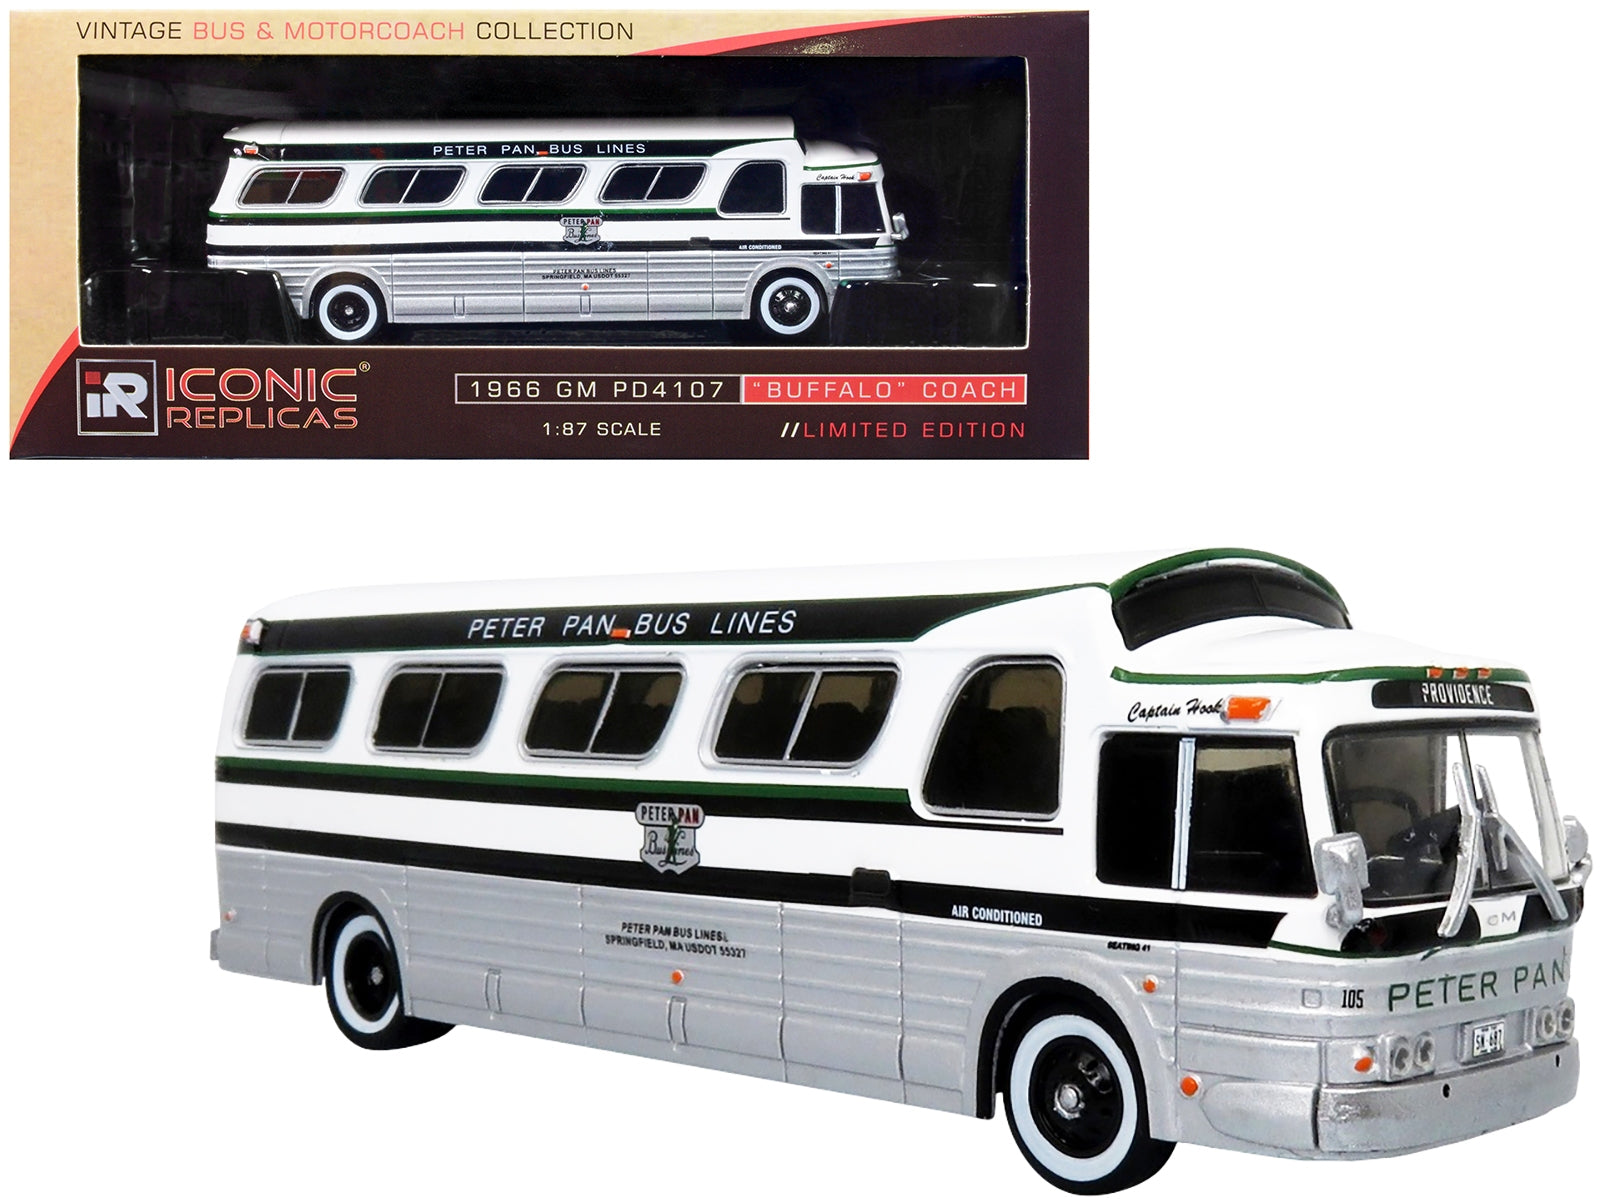 1966 GM PD4107 "Buffalo" Coach Bus "Peter Pan Bus Lines" Destination: "Providence" (Rhode Island) "Vintage Bus & Motorcoach Collection" 1/87 Diecast Model by Iconic Replicas